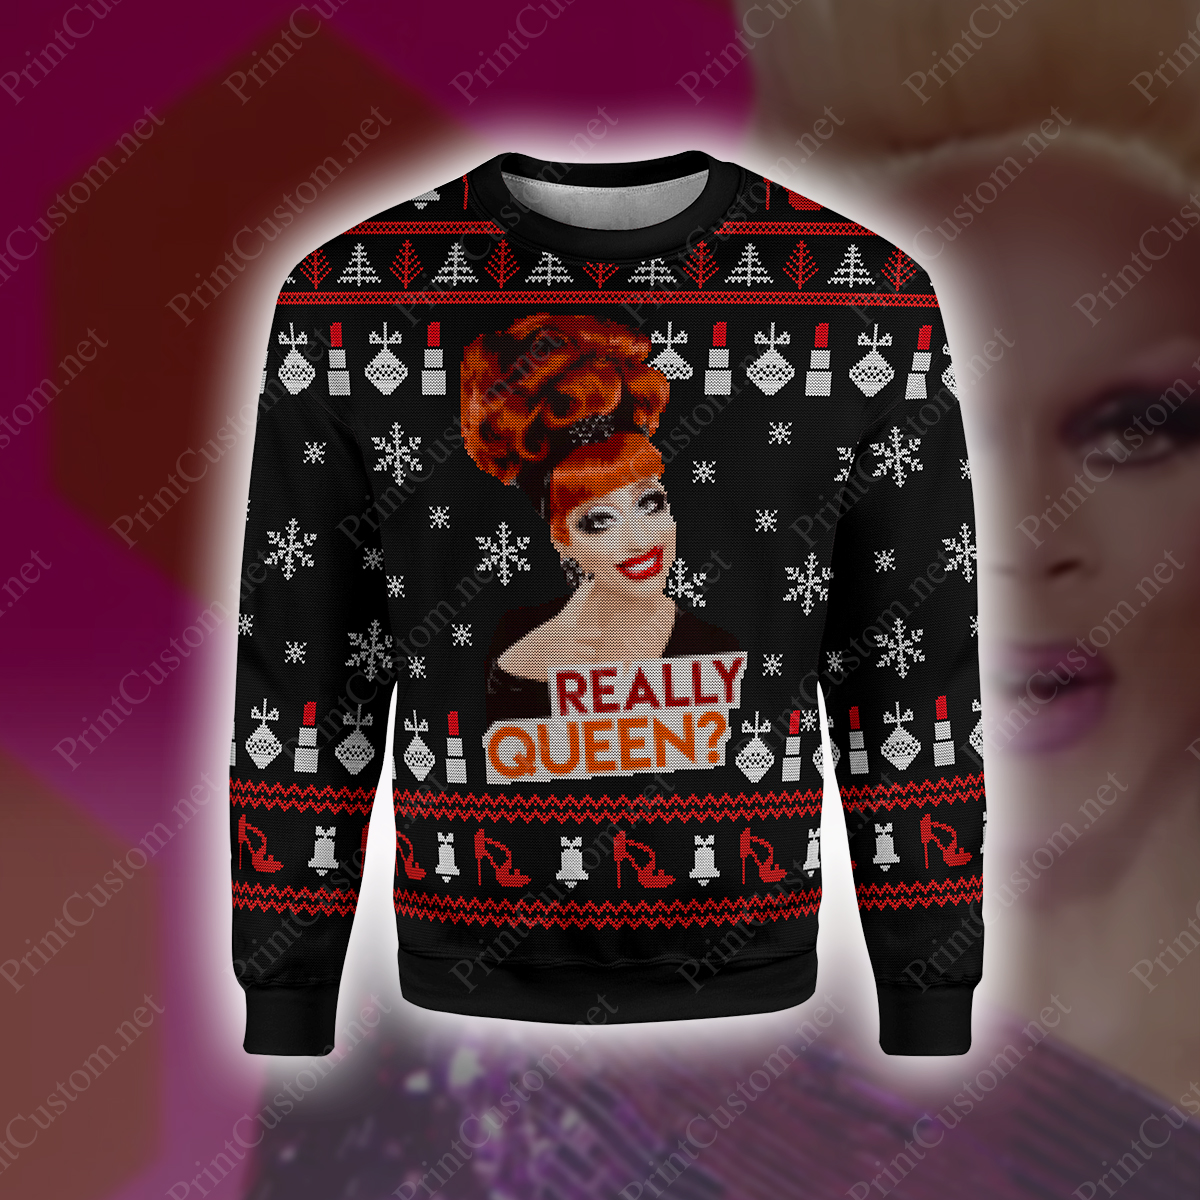 Really queen rupaul's drag race full printing ugly christmas sweater 1